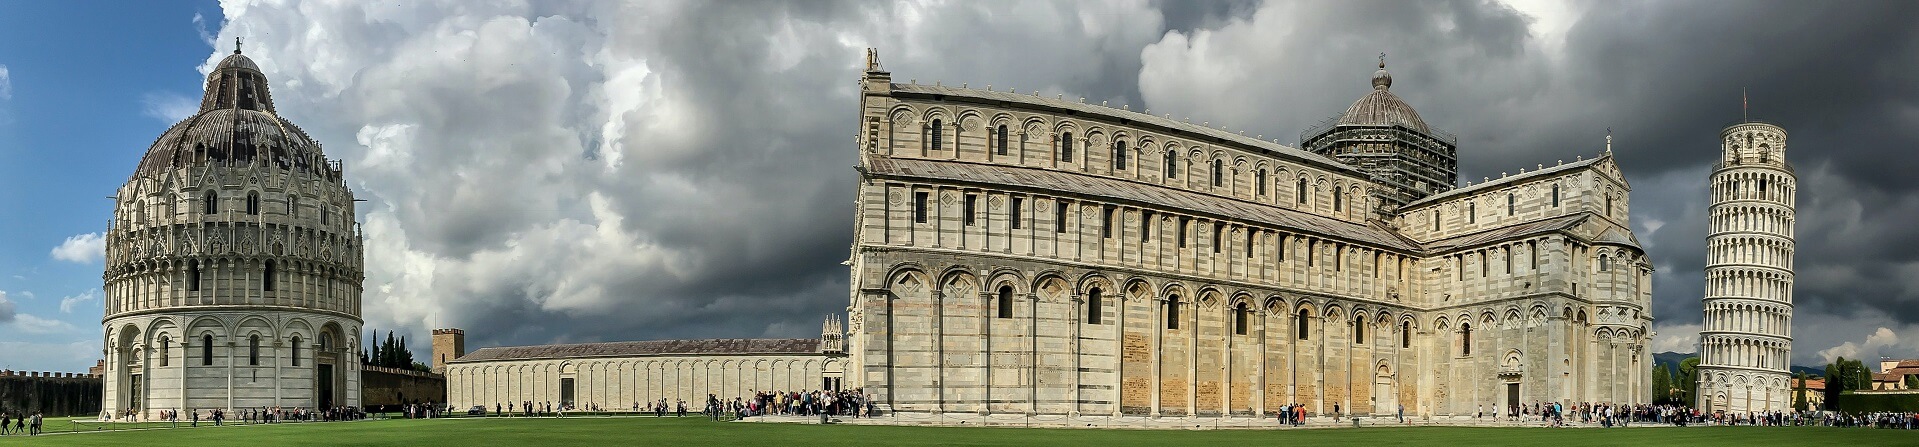 Is Pisa open for tourists?